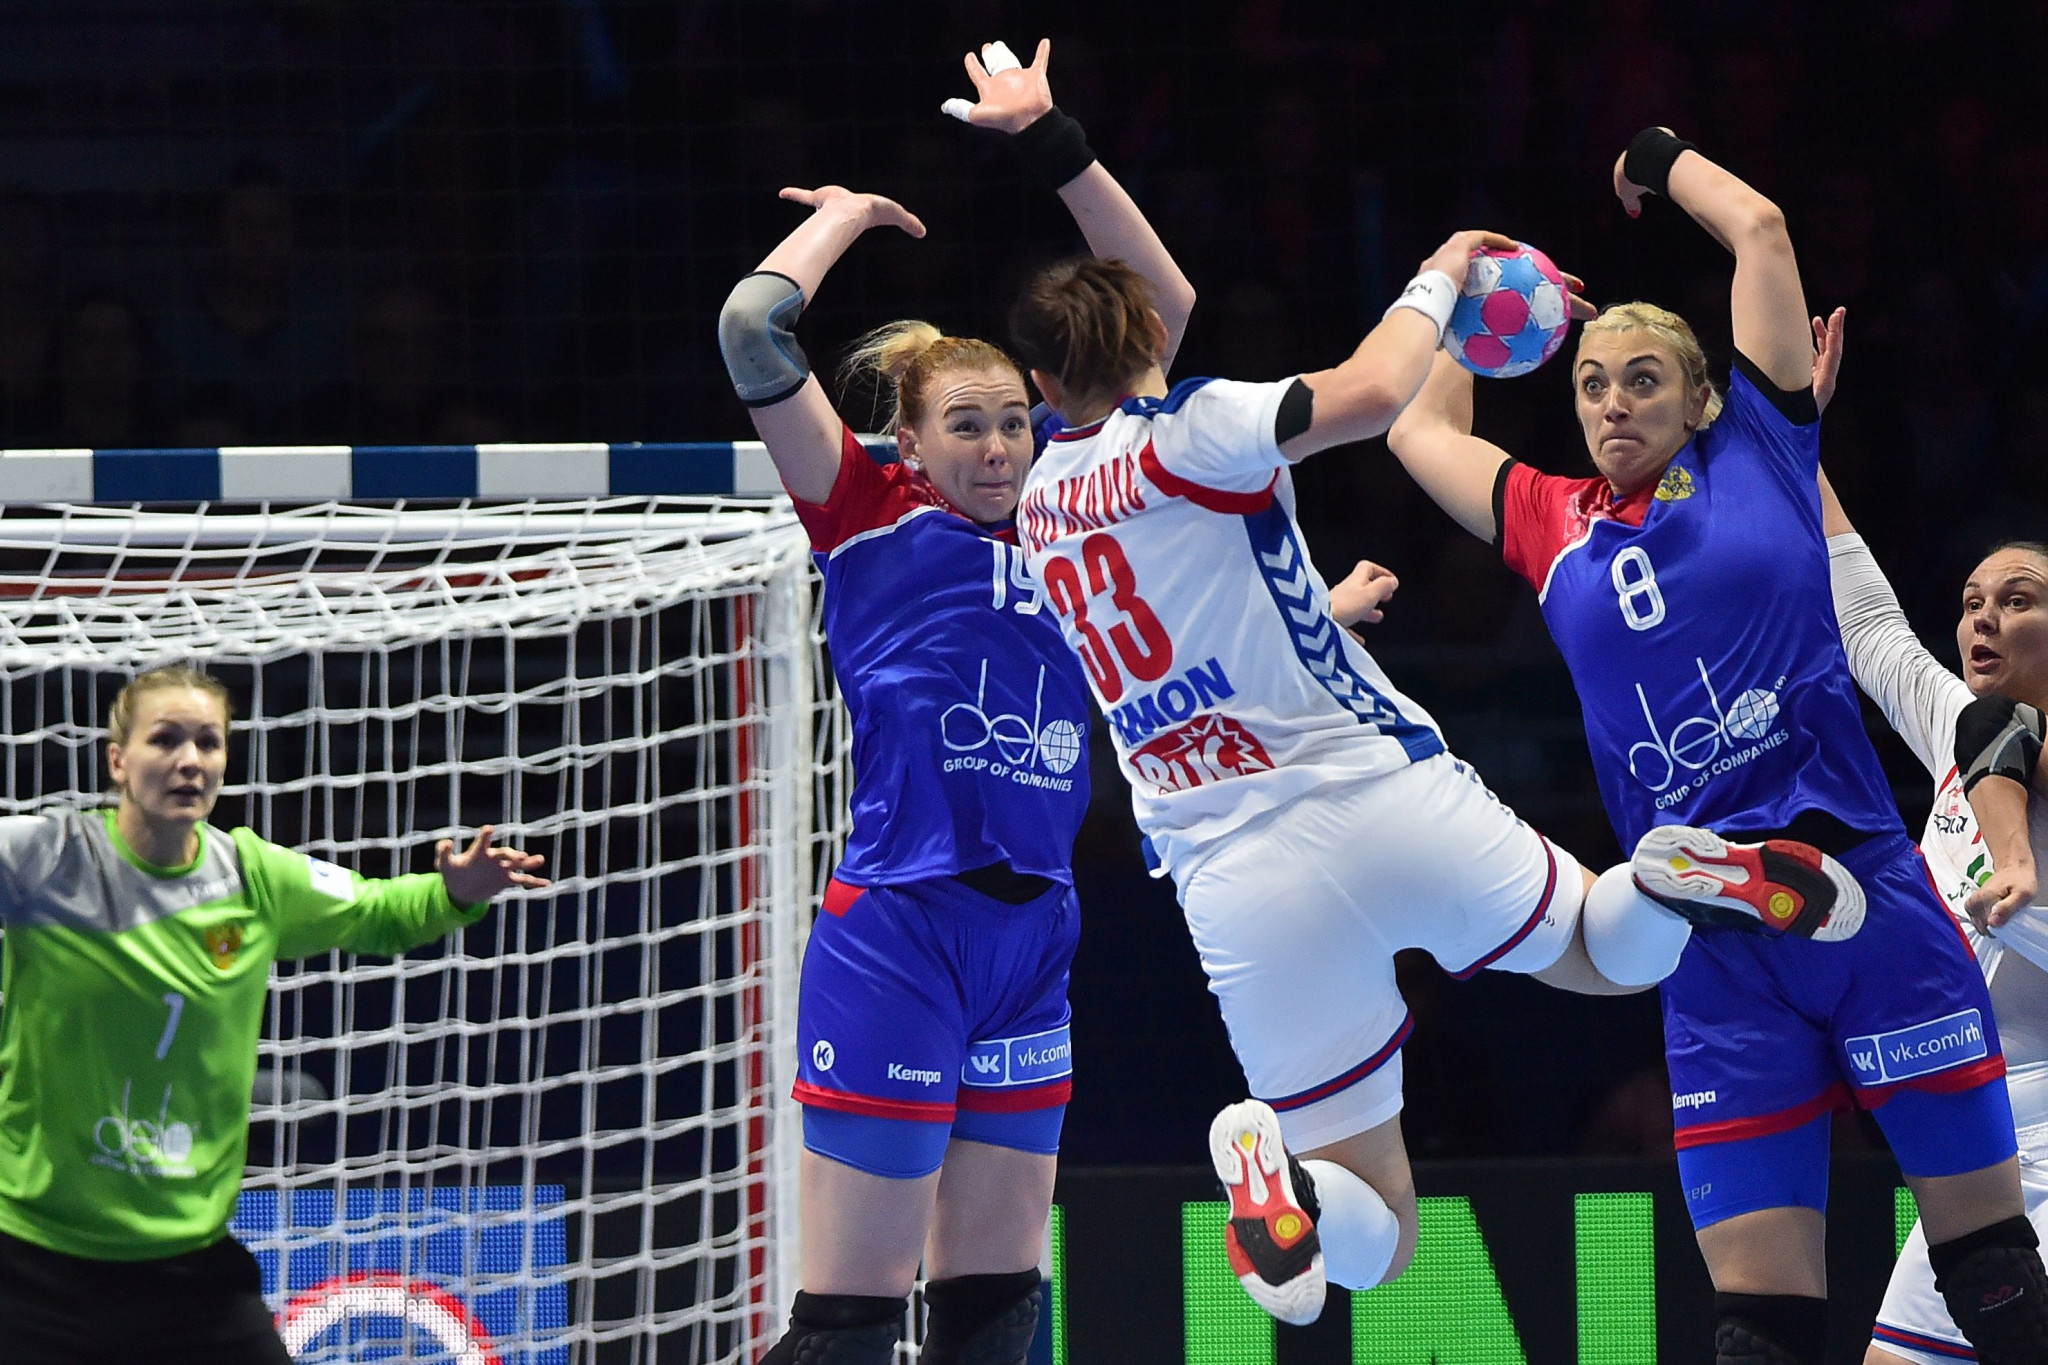 Russia defeated Serbia 29-25 in Group I of the main round at the European Women's Handball Championships ©Getty Images